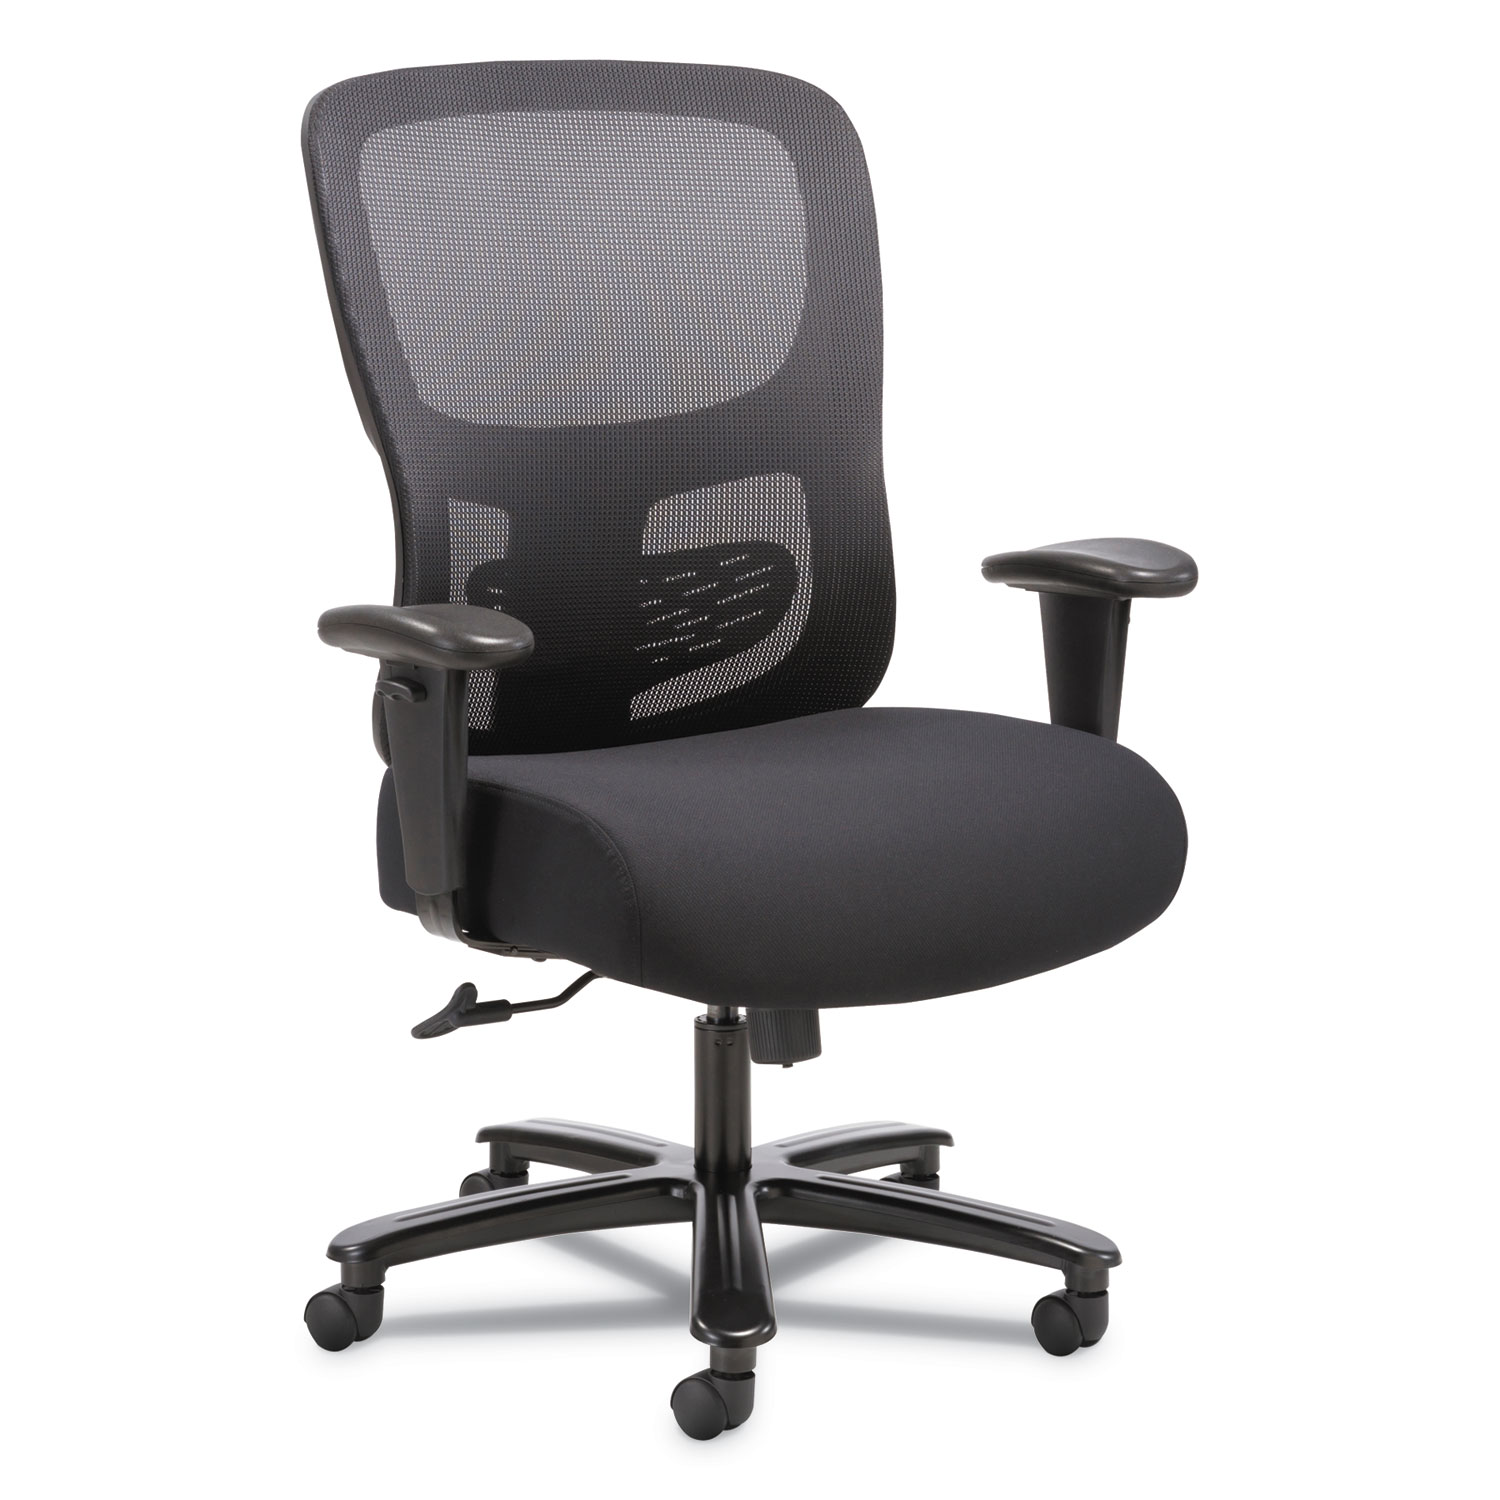  Sadie HVST141 1-Fourty-One Big and Tall Mesh Task Chair, Supports up to 350 lbs., Black Seat/Black Back, Black Base (BSXVST141) 